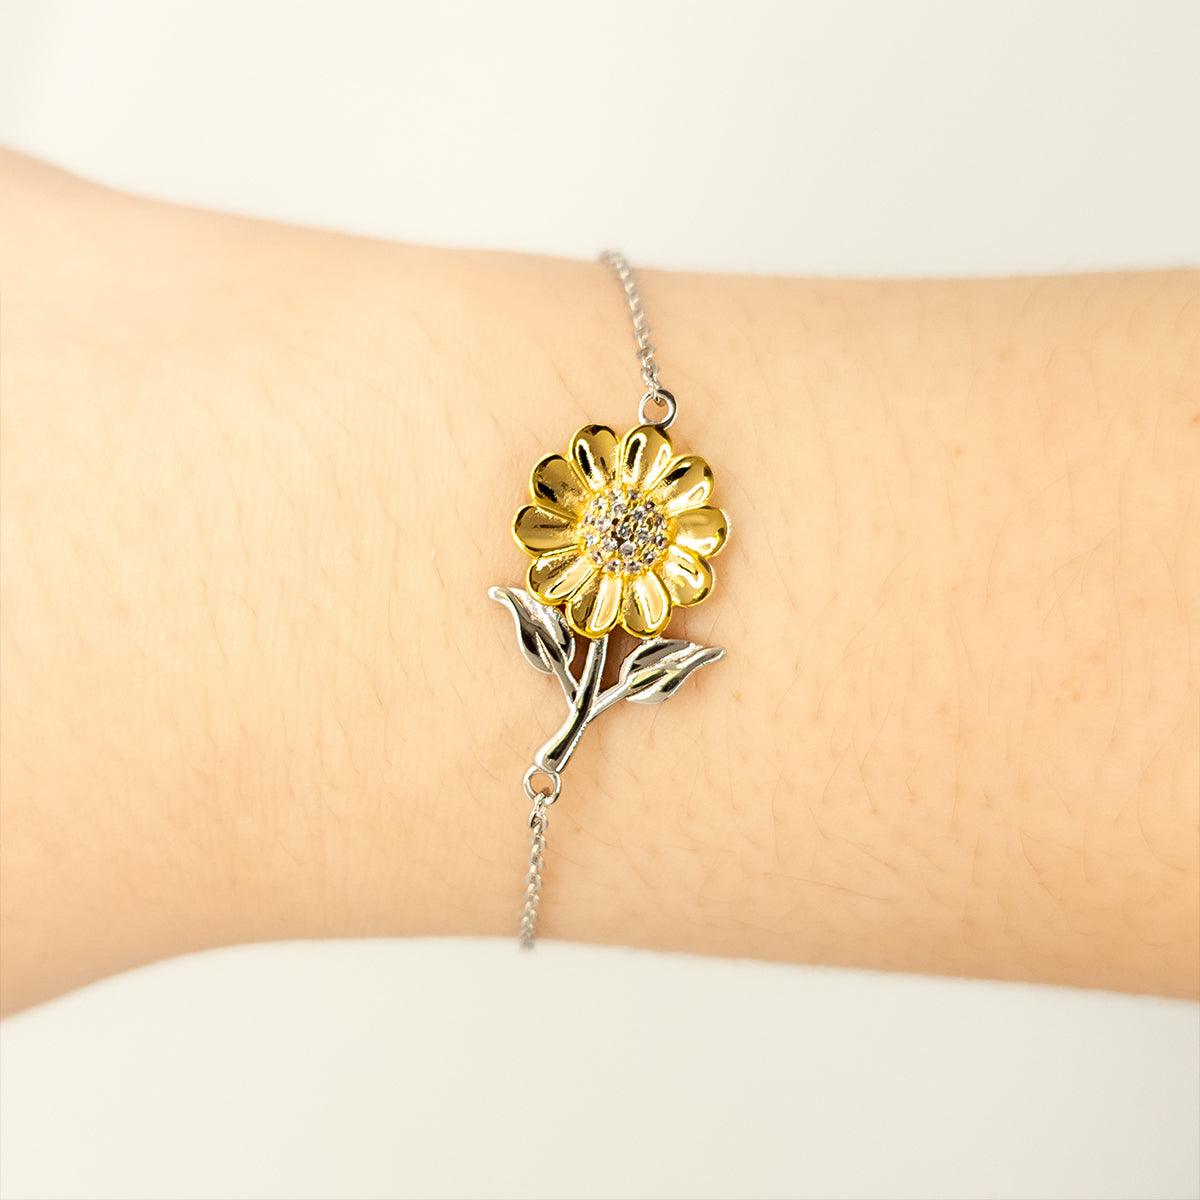 Remarkable Comedian Gifts, Your dedication and hard work, Inspirational Birthday Christmas Unique Sunflower Bracelet For Comedian, Coworkers, Men, Women, Friends - Mallard Moon Gift Shop